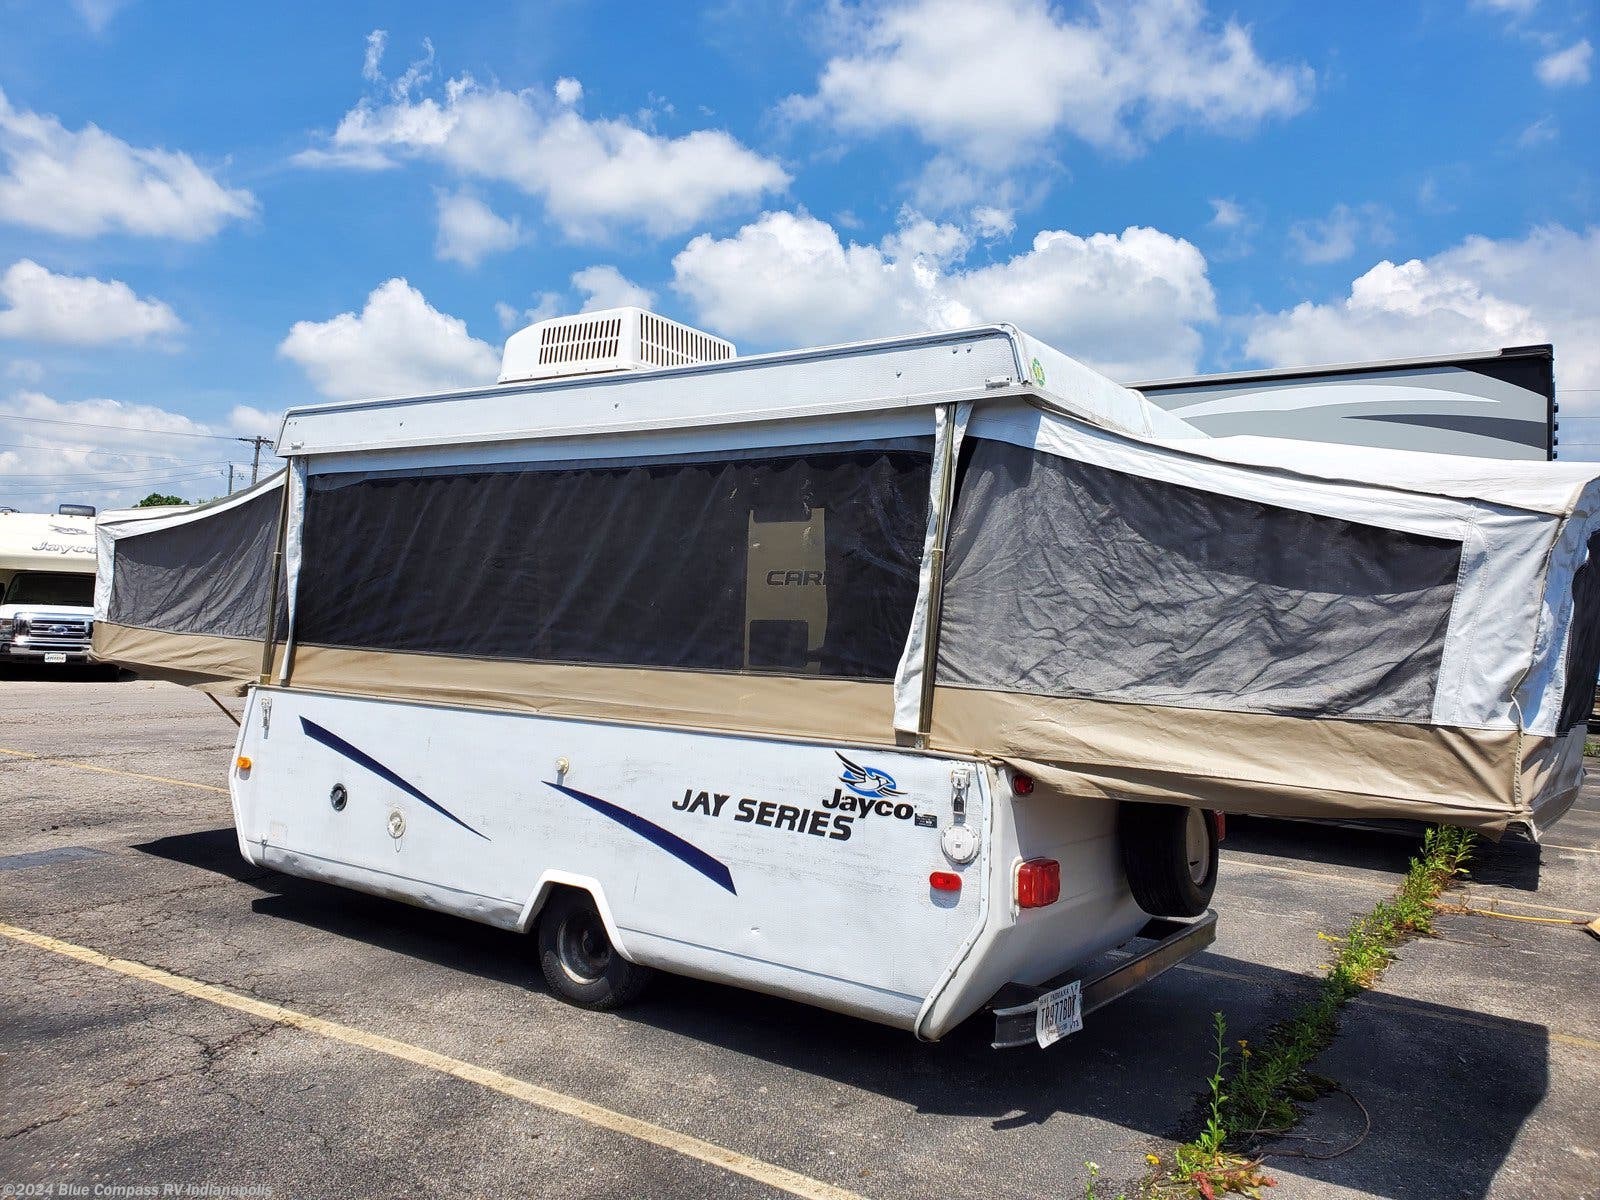 1996 Jayco Jayco RV for Sale in Indianapolis, IN 46203 | 126193-B 1996 Jayco 1006 Pop Up Camper